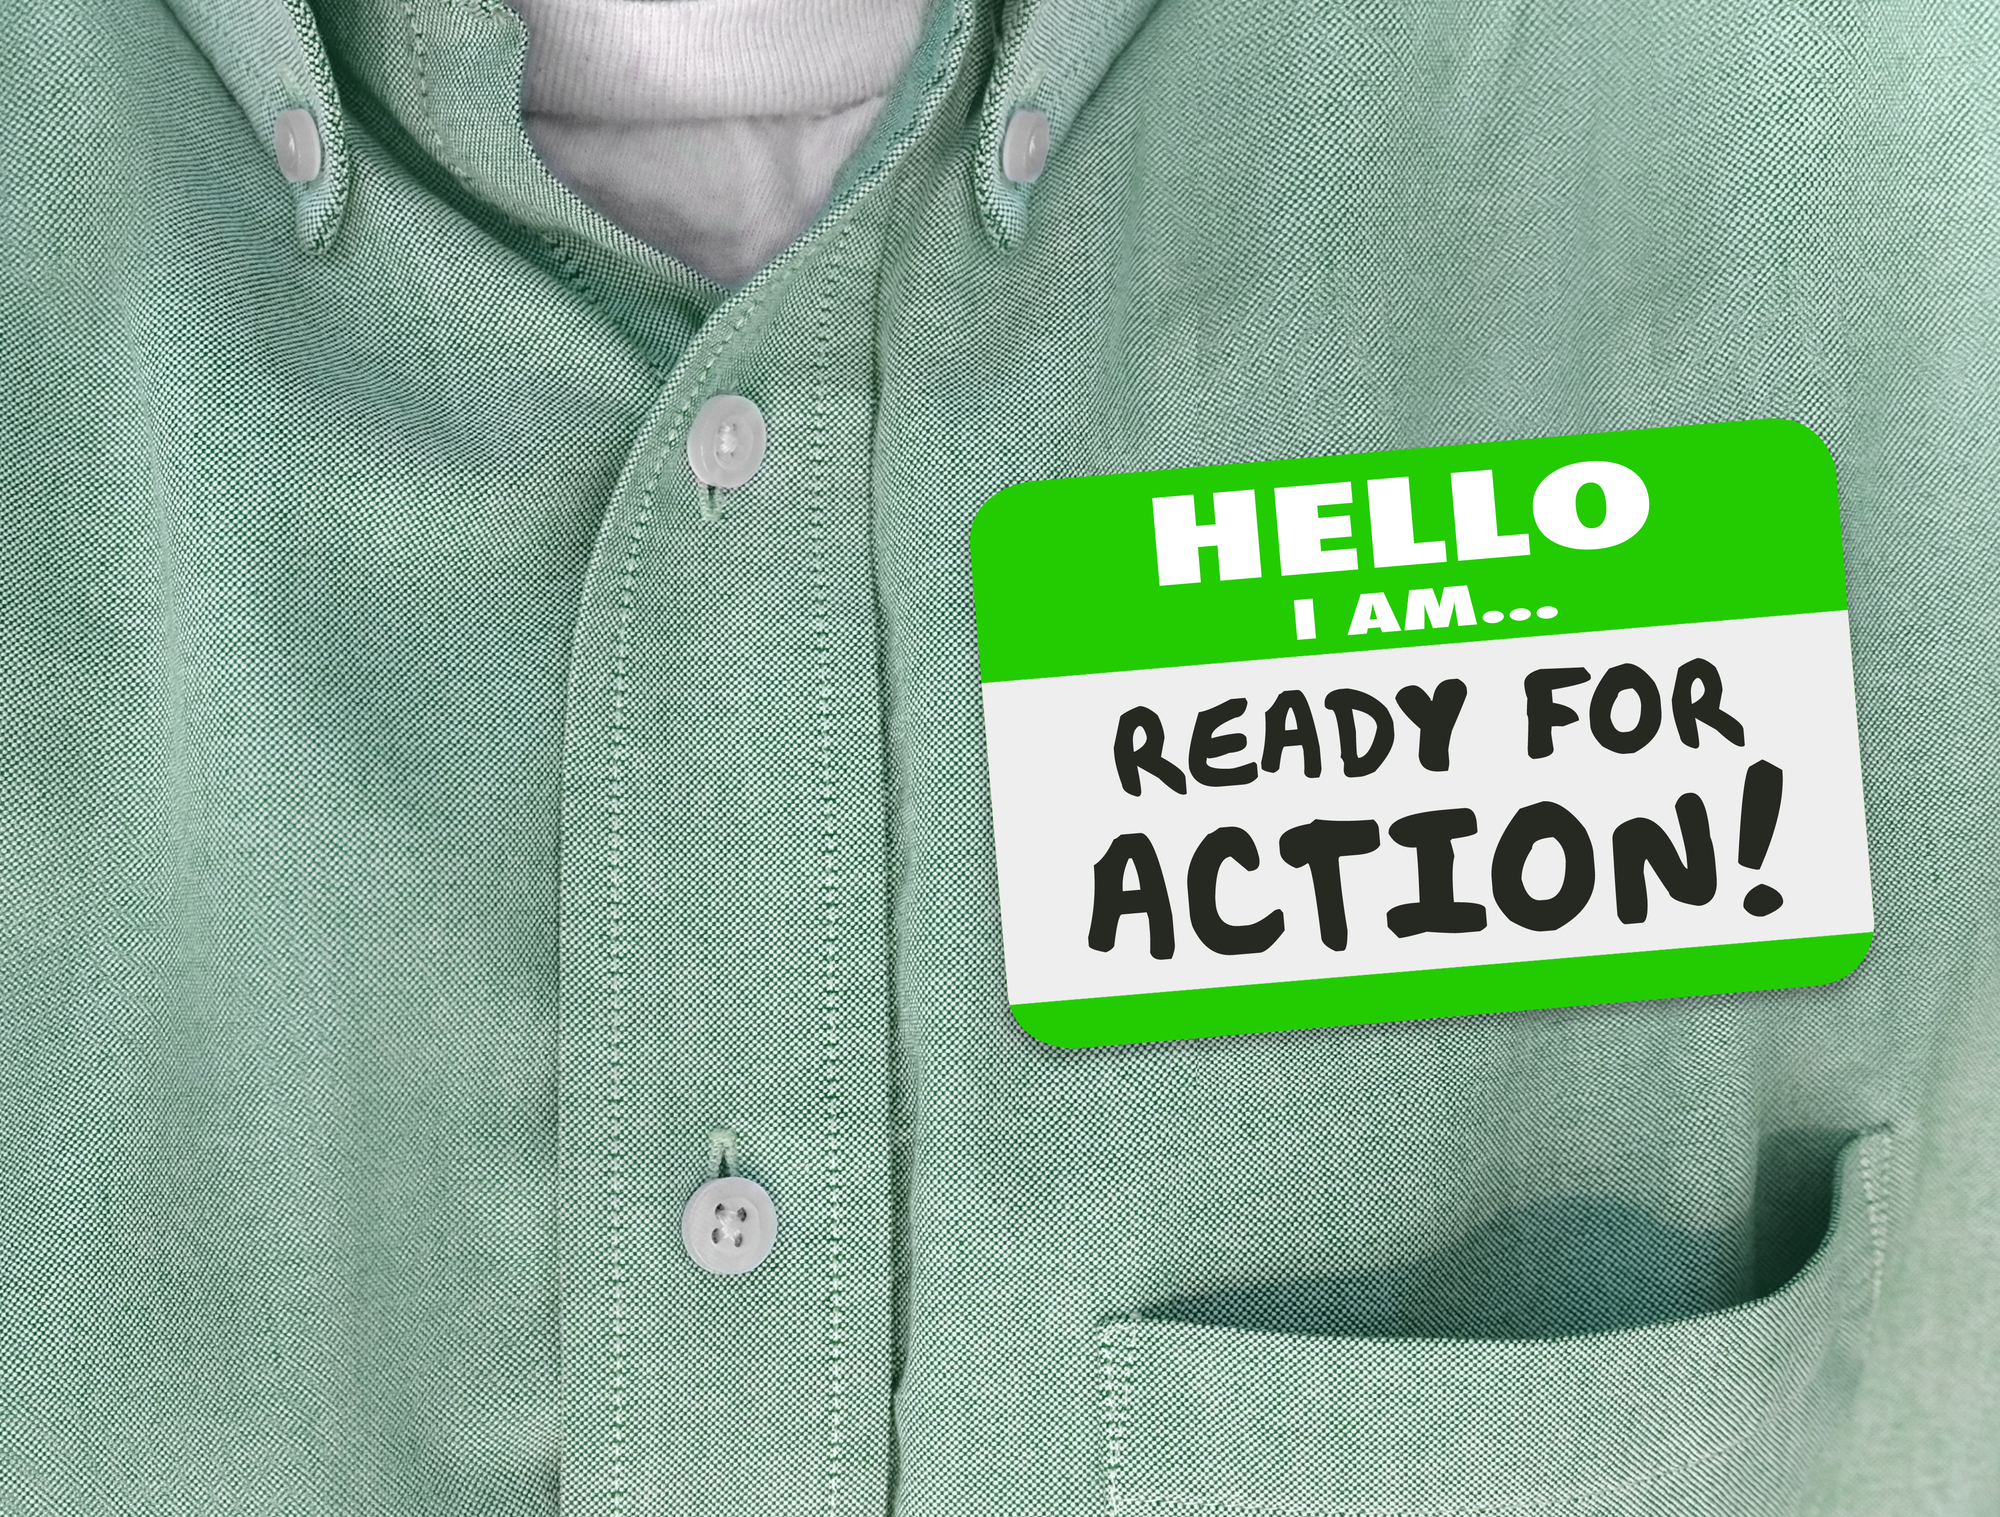 green shirt with a nametag sticker that says "hello I am... ready for action!".